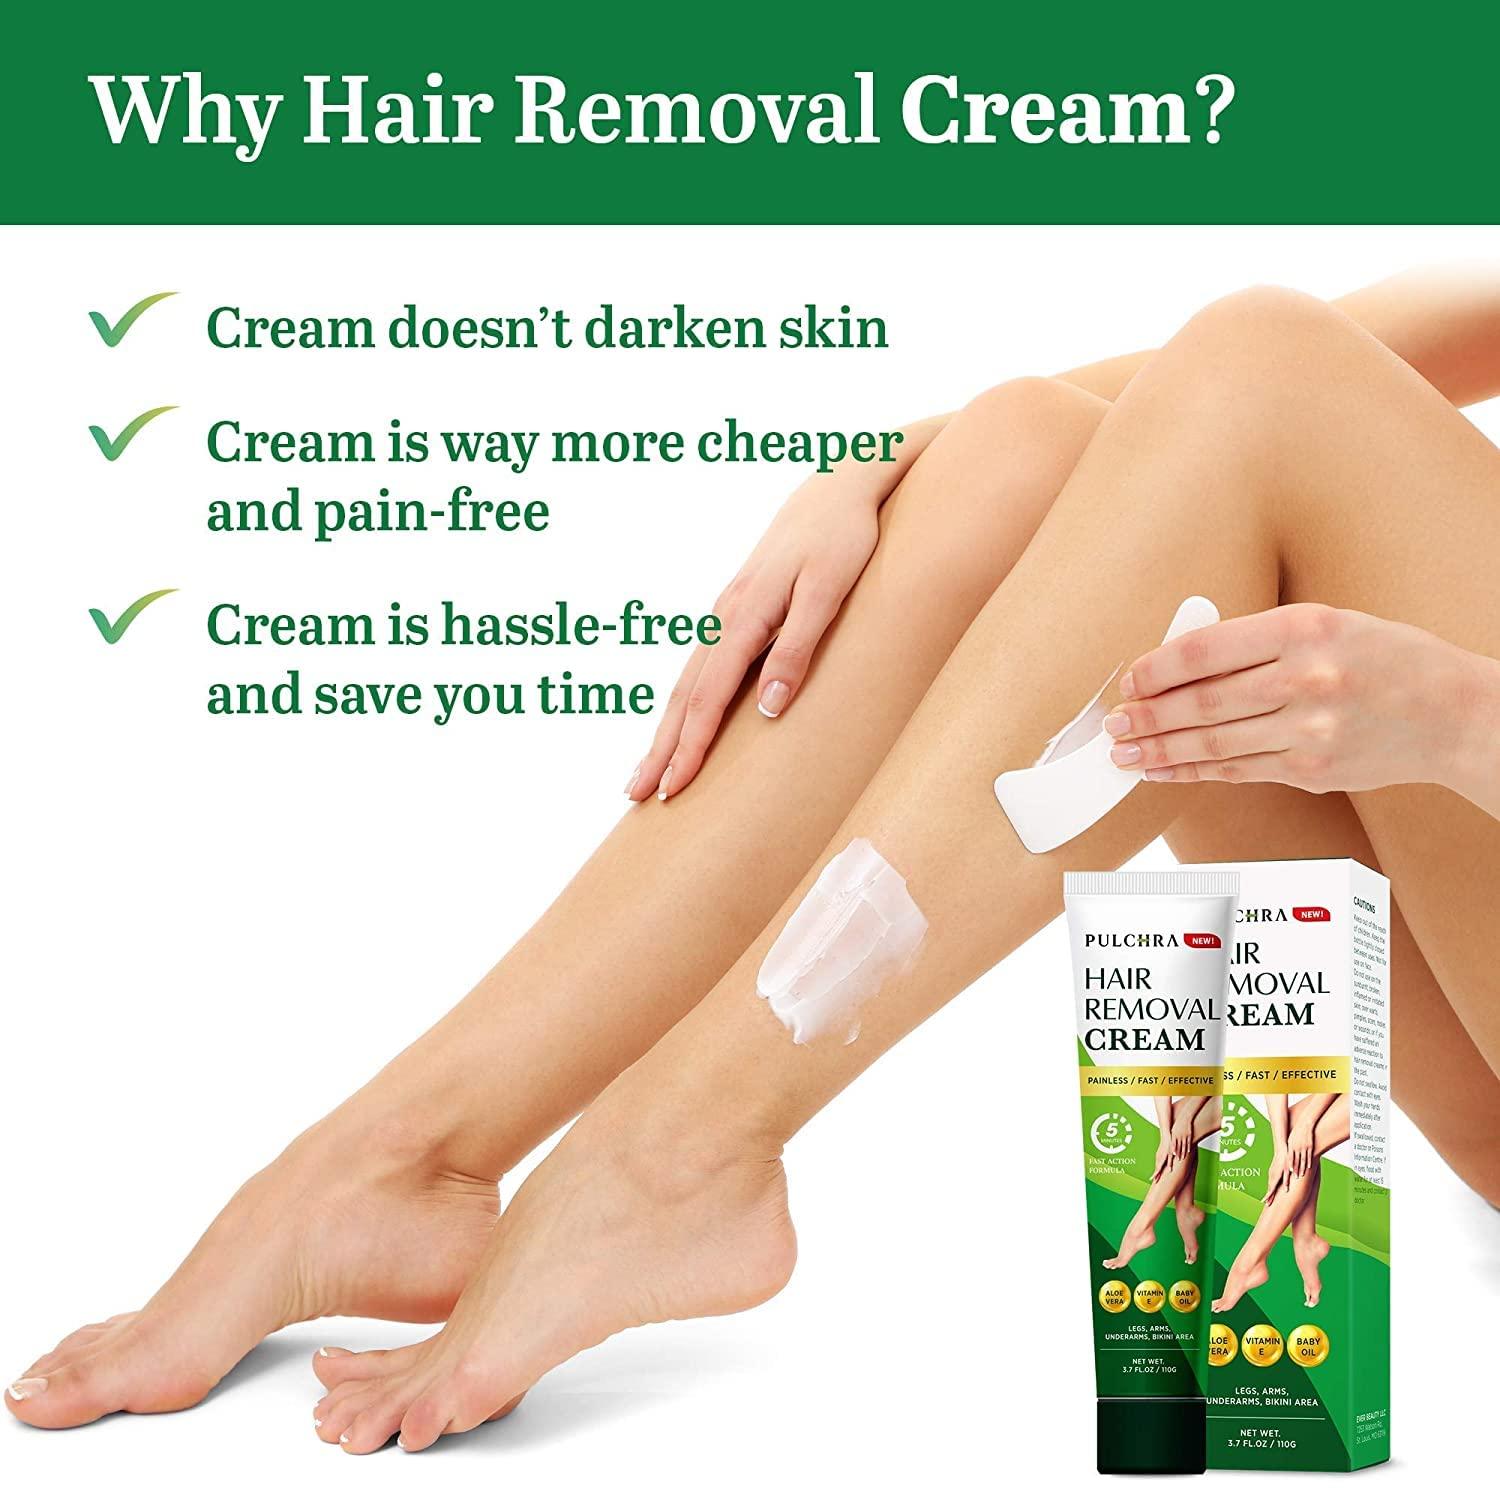 Hair Removal Cream for Women and Men - Leg & Pubic & Bikini Hair Removal  Premium Depilatory Cream - Skin Friendly Painless Flawless Hair Remover  Cream - Easy Application and Great Option